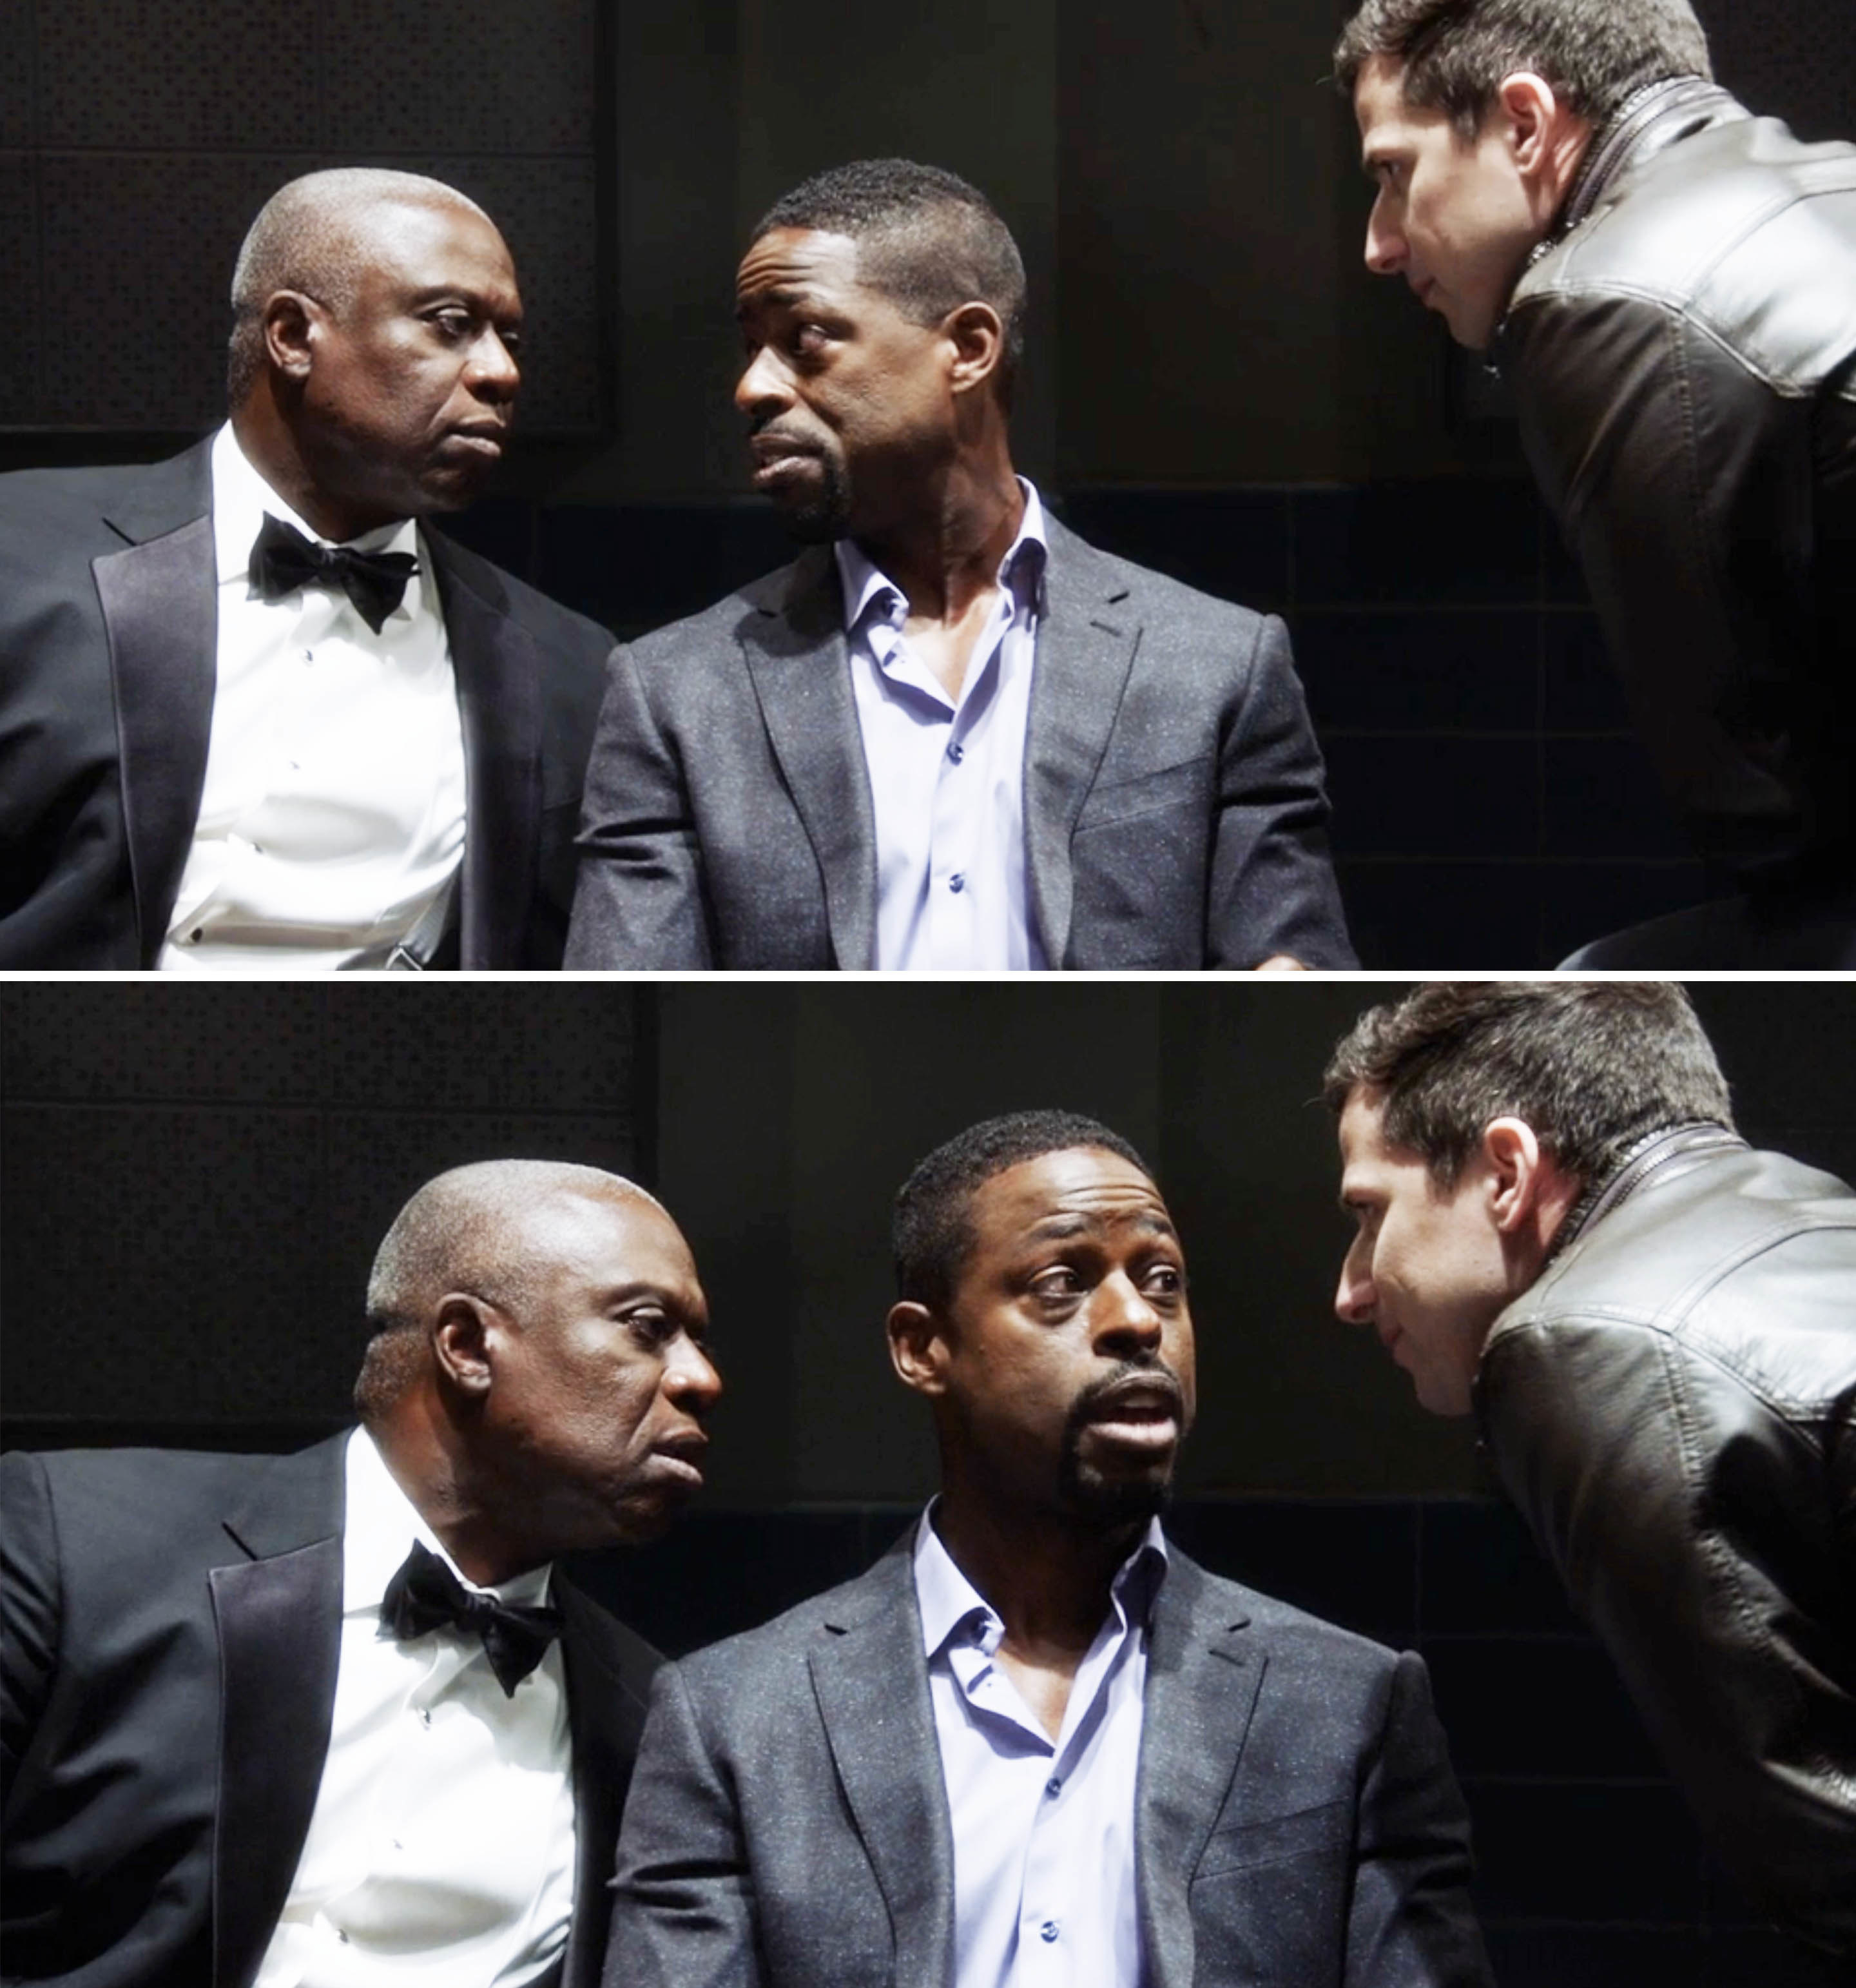 three men looking and talking to each other in close proximity